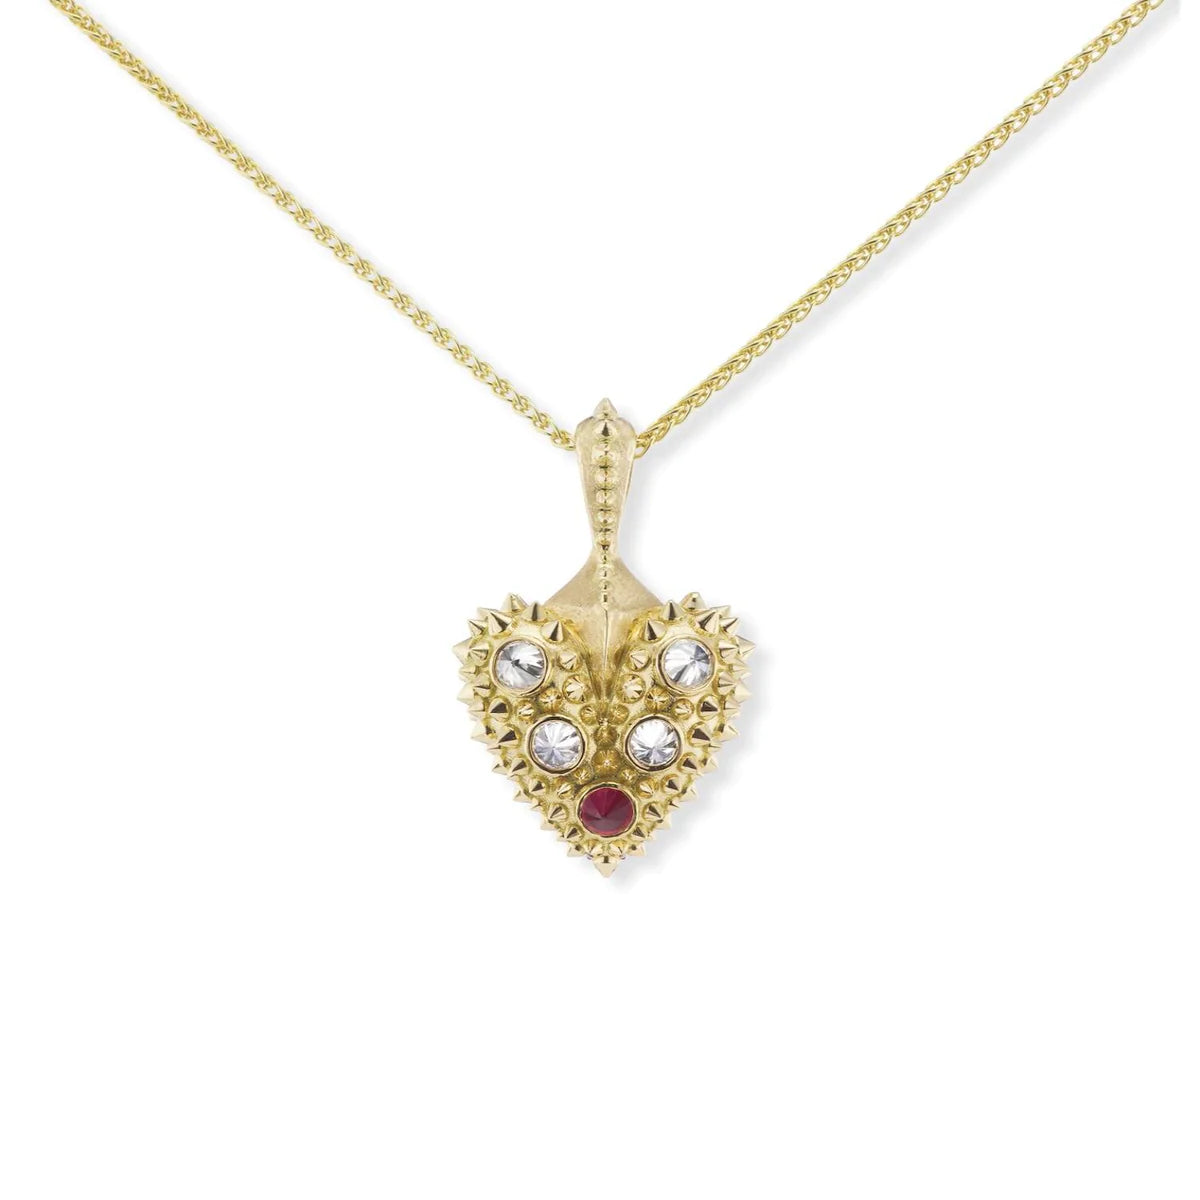 Pierce Your Heart Diamond and Ruby Necklace